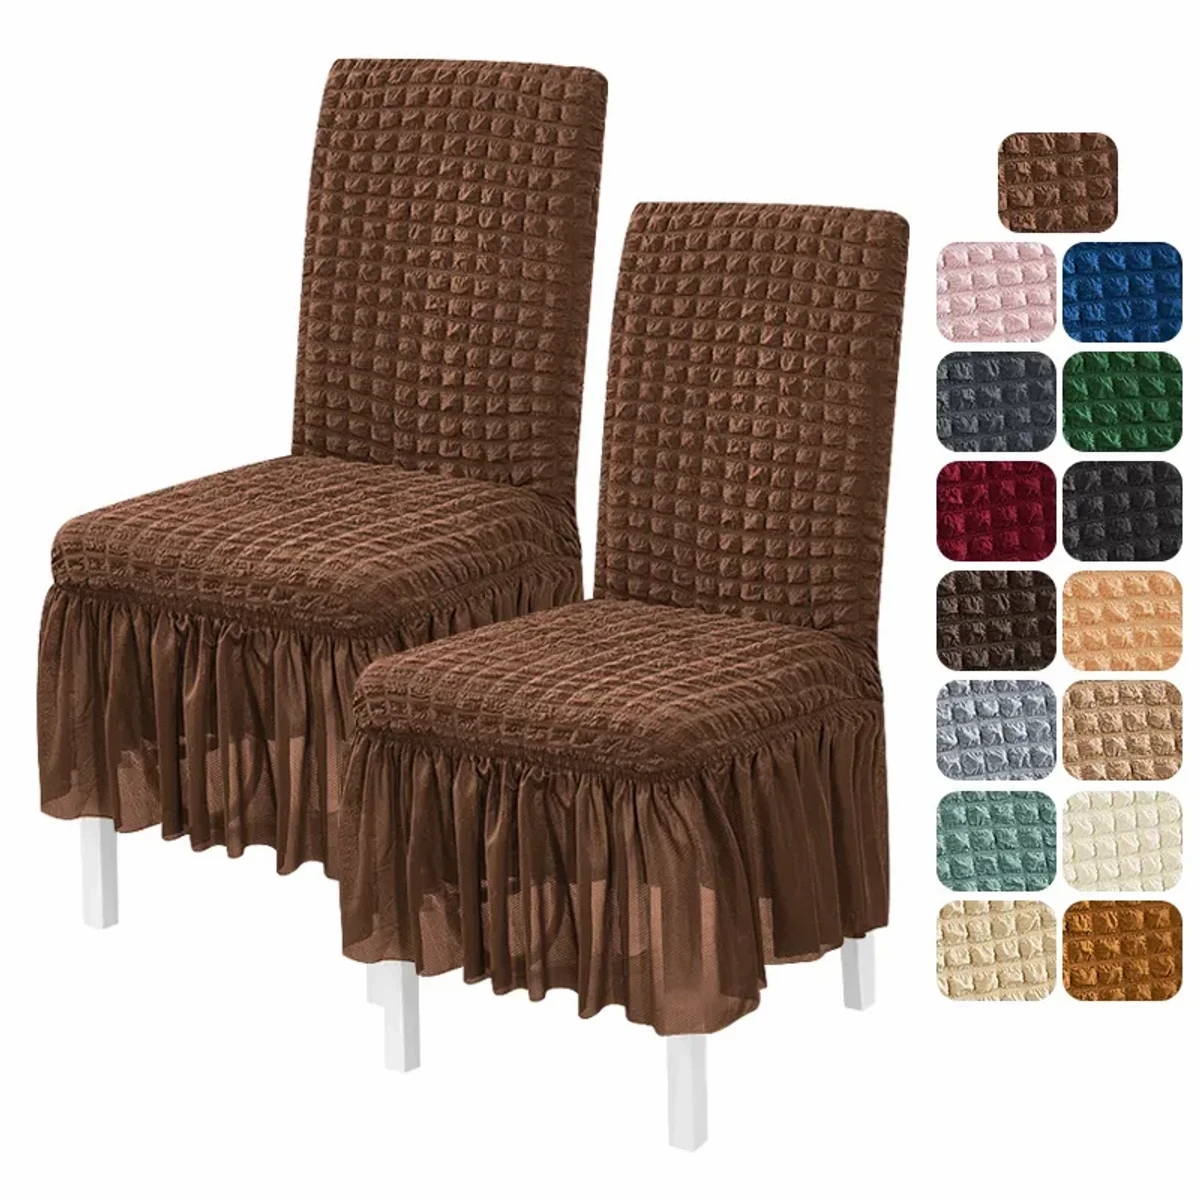 Chair Covers for Dining Room Seat (coffee colour,merun colour,sky blue colour)